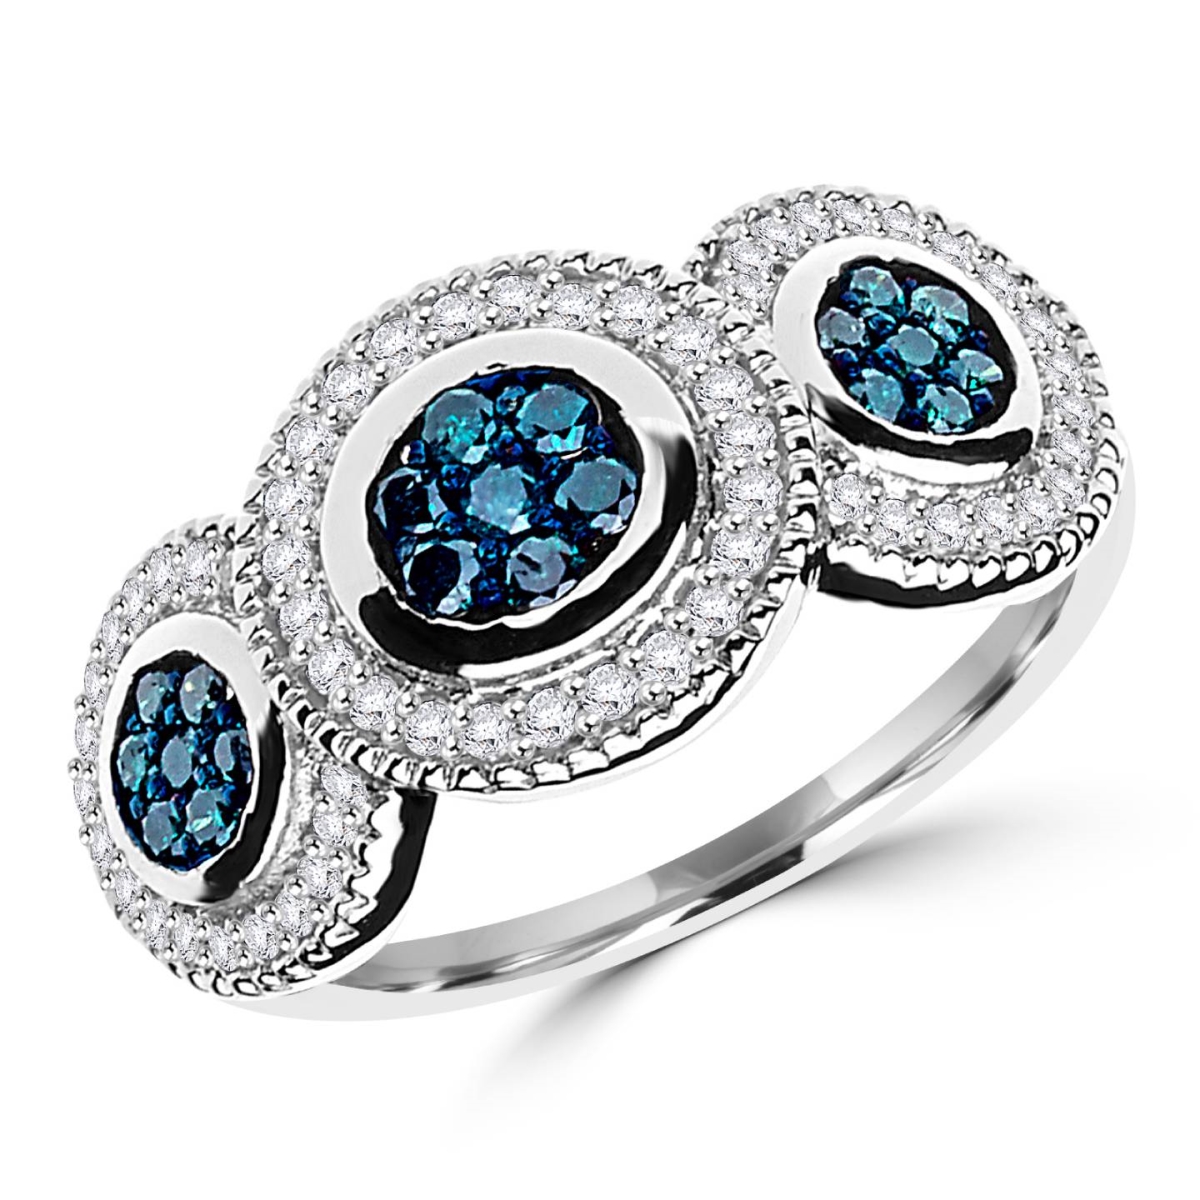 Picture of Majesty Diamonds MDR140010-P 0.63 CTW Round Blue & White Diamond Halo Cocktail Anniversary Ring in 14K White Gold